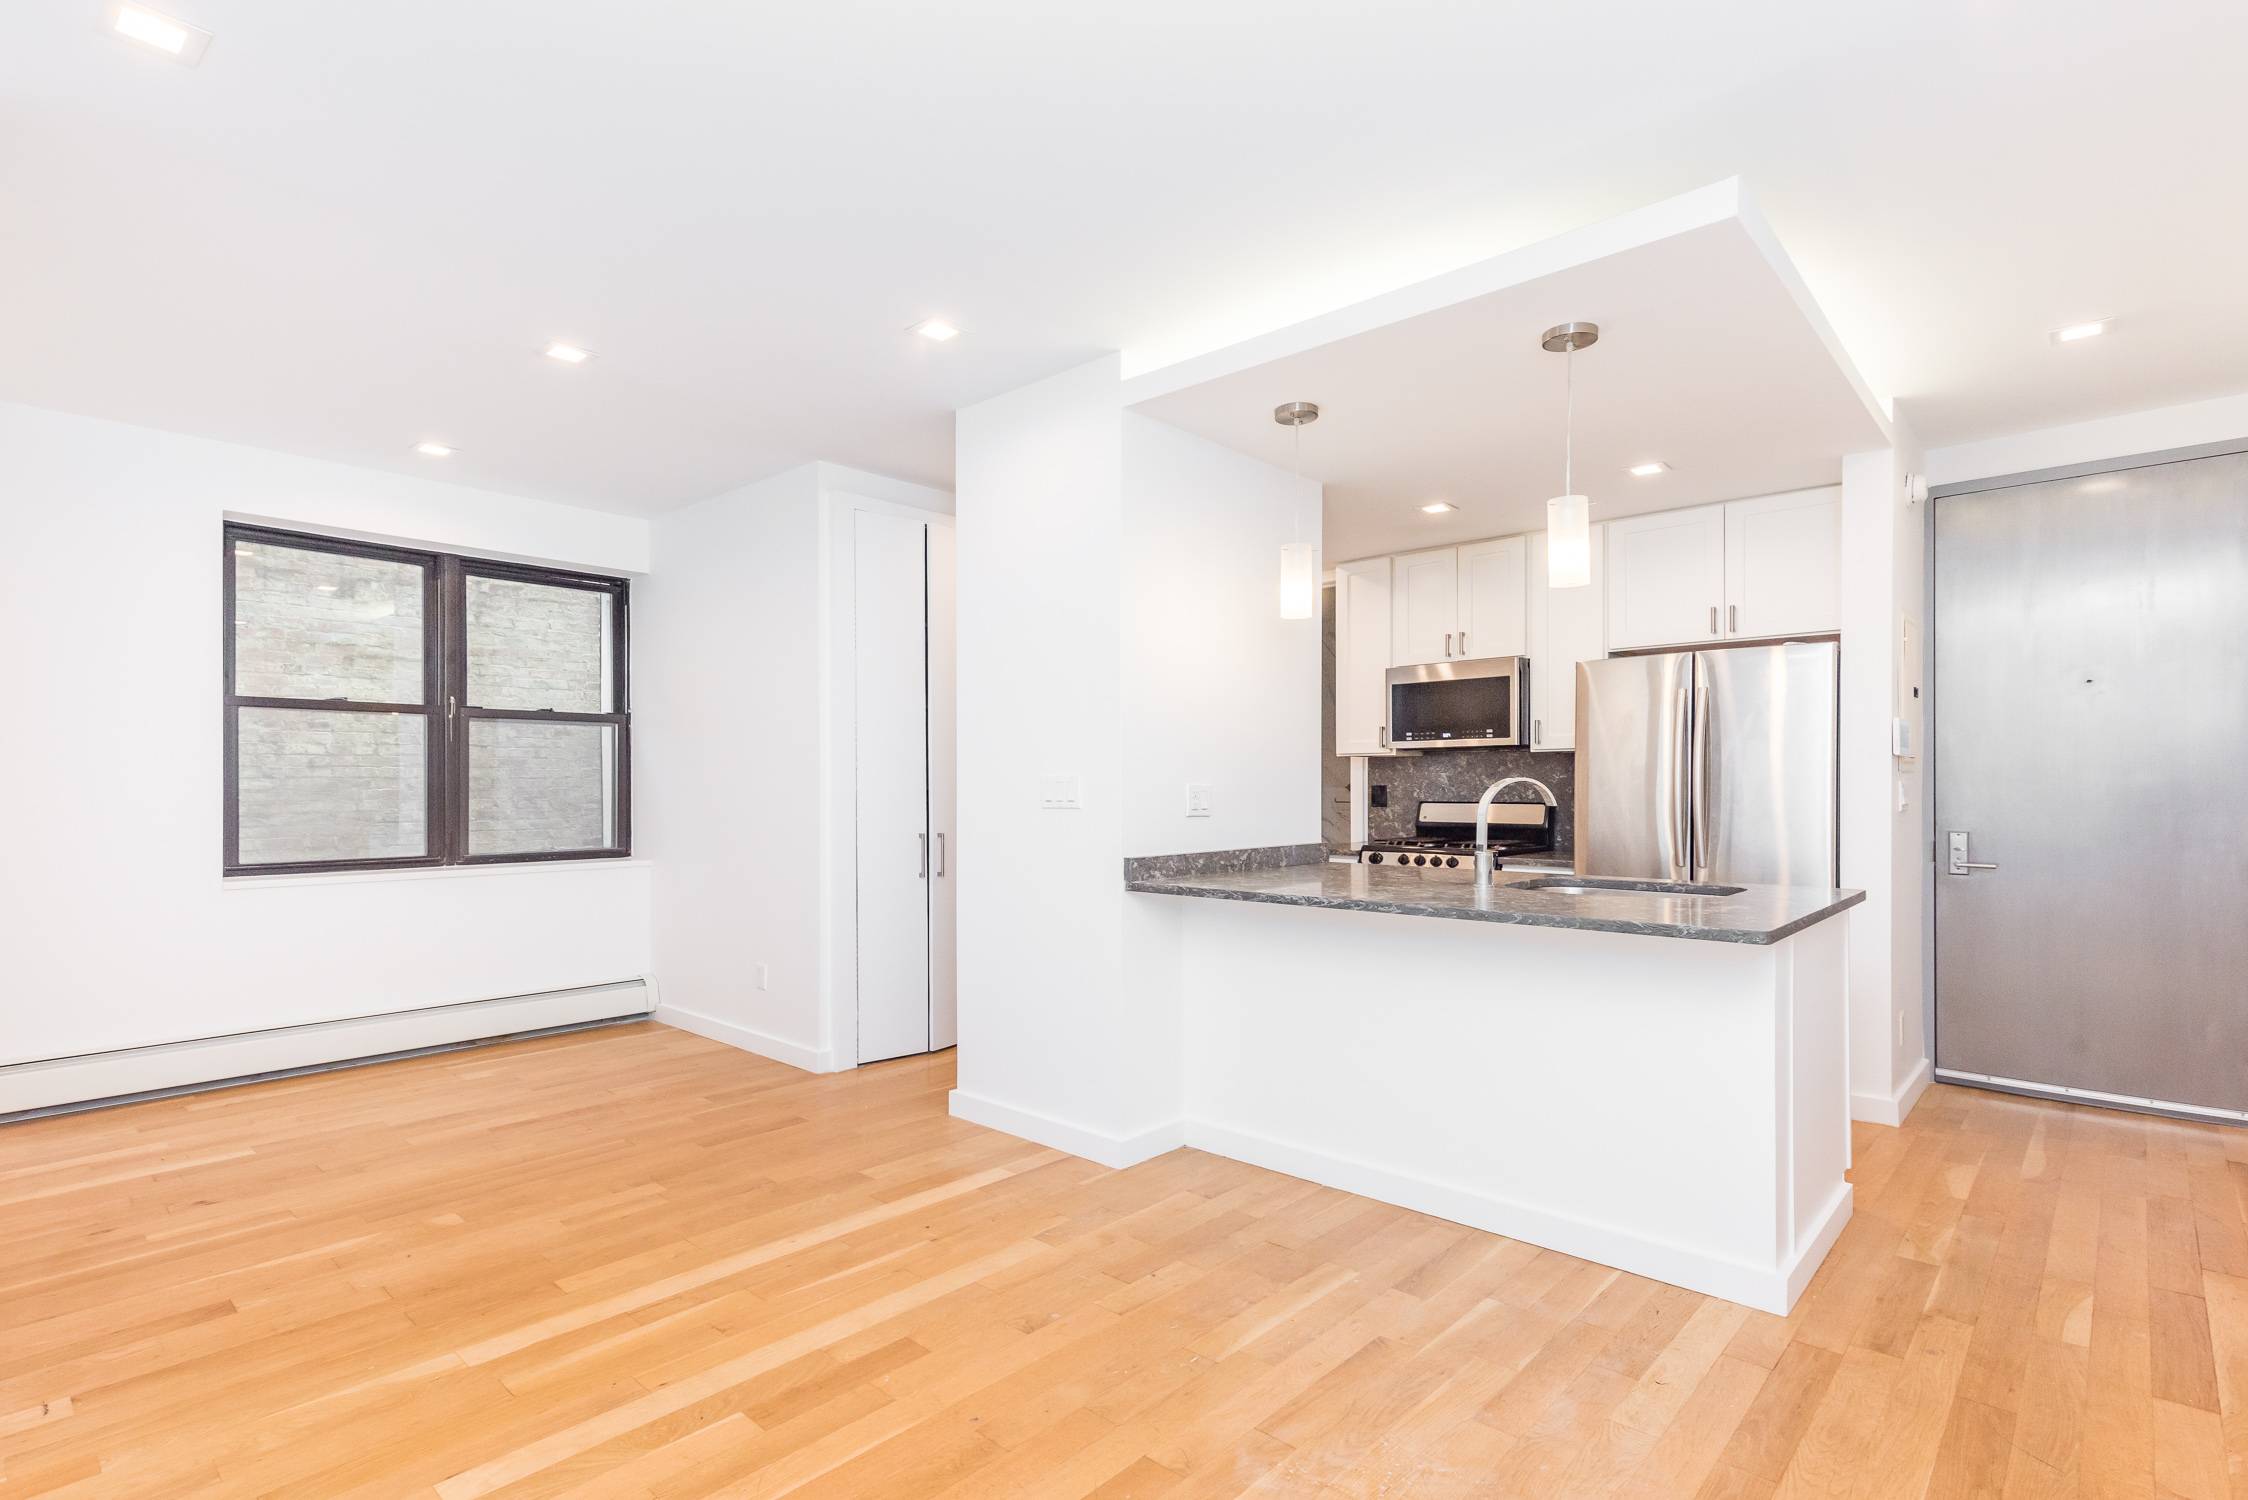 Located on the 2nd floor of a walk up building in the very desirable Ditmars district of Astoria.